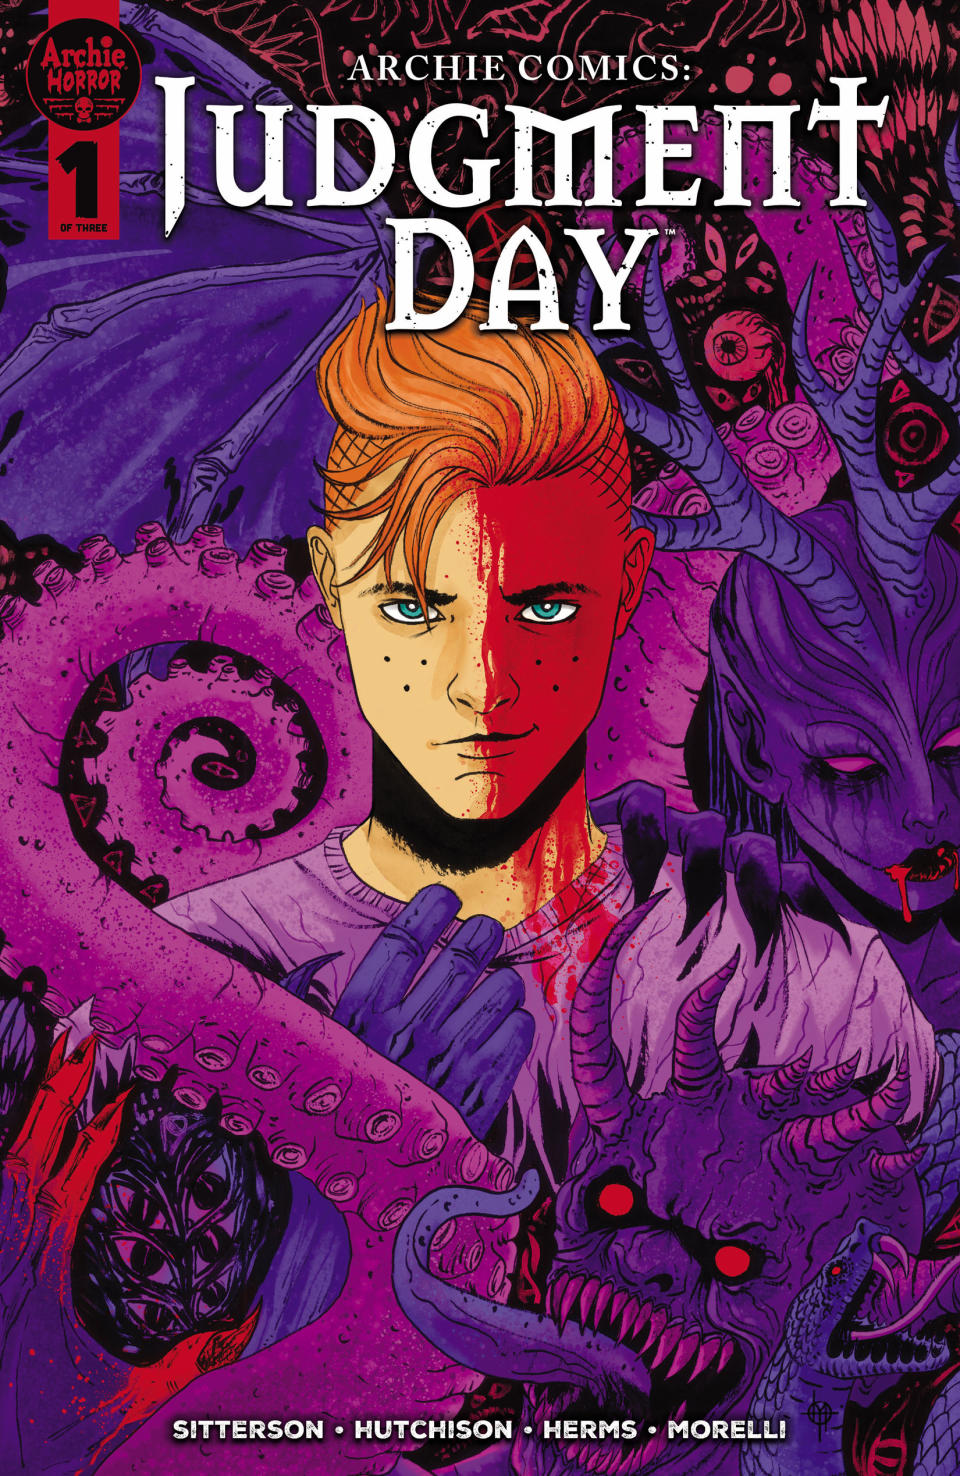 Covers from Archie Comics: Judgment Day